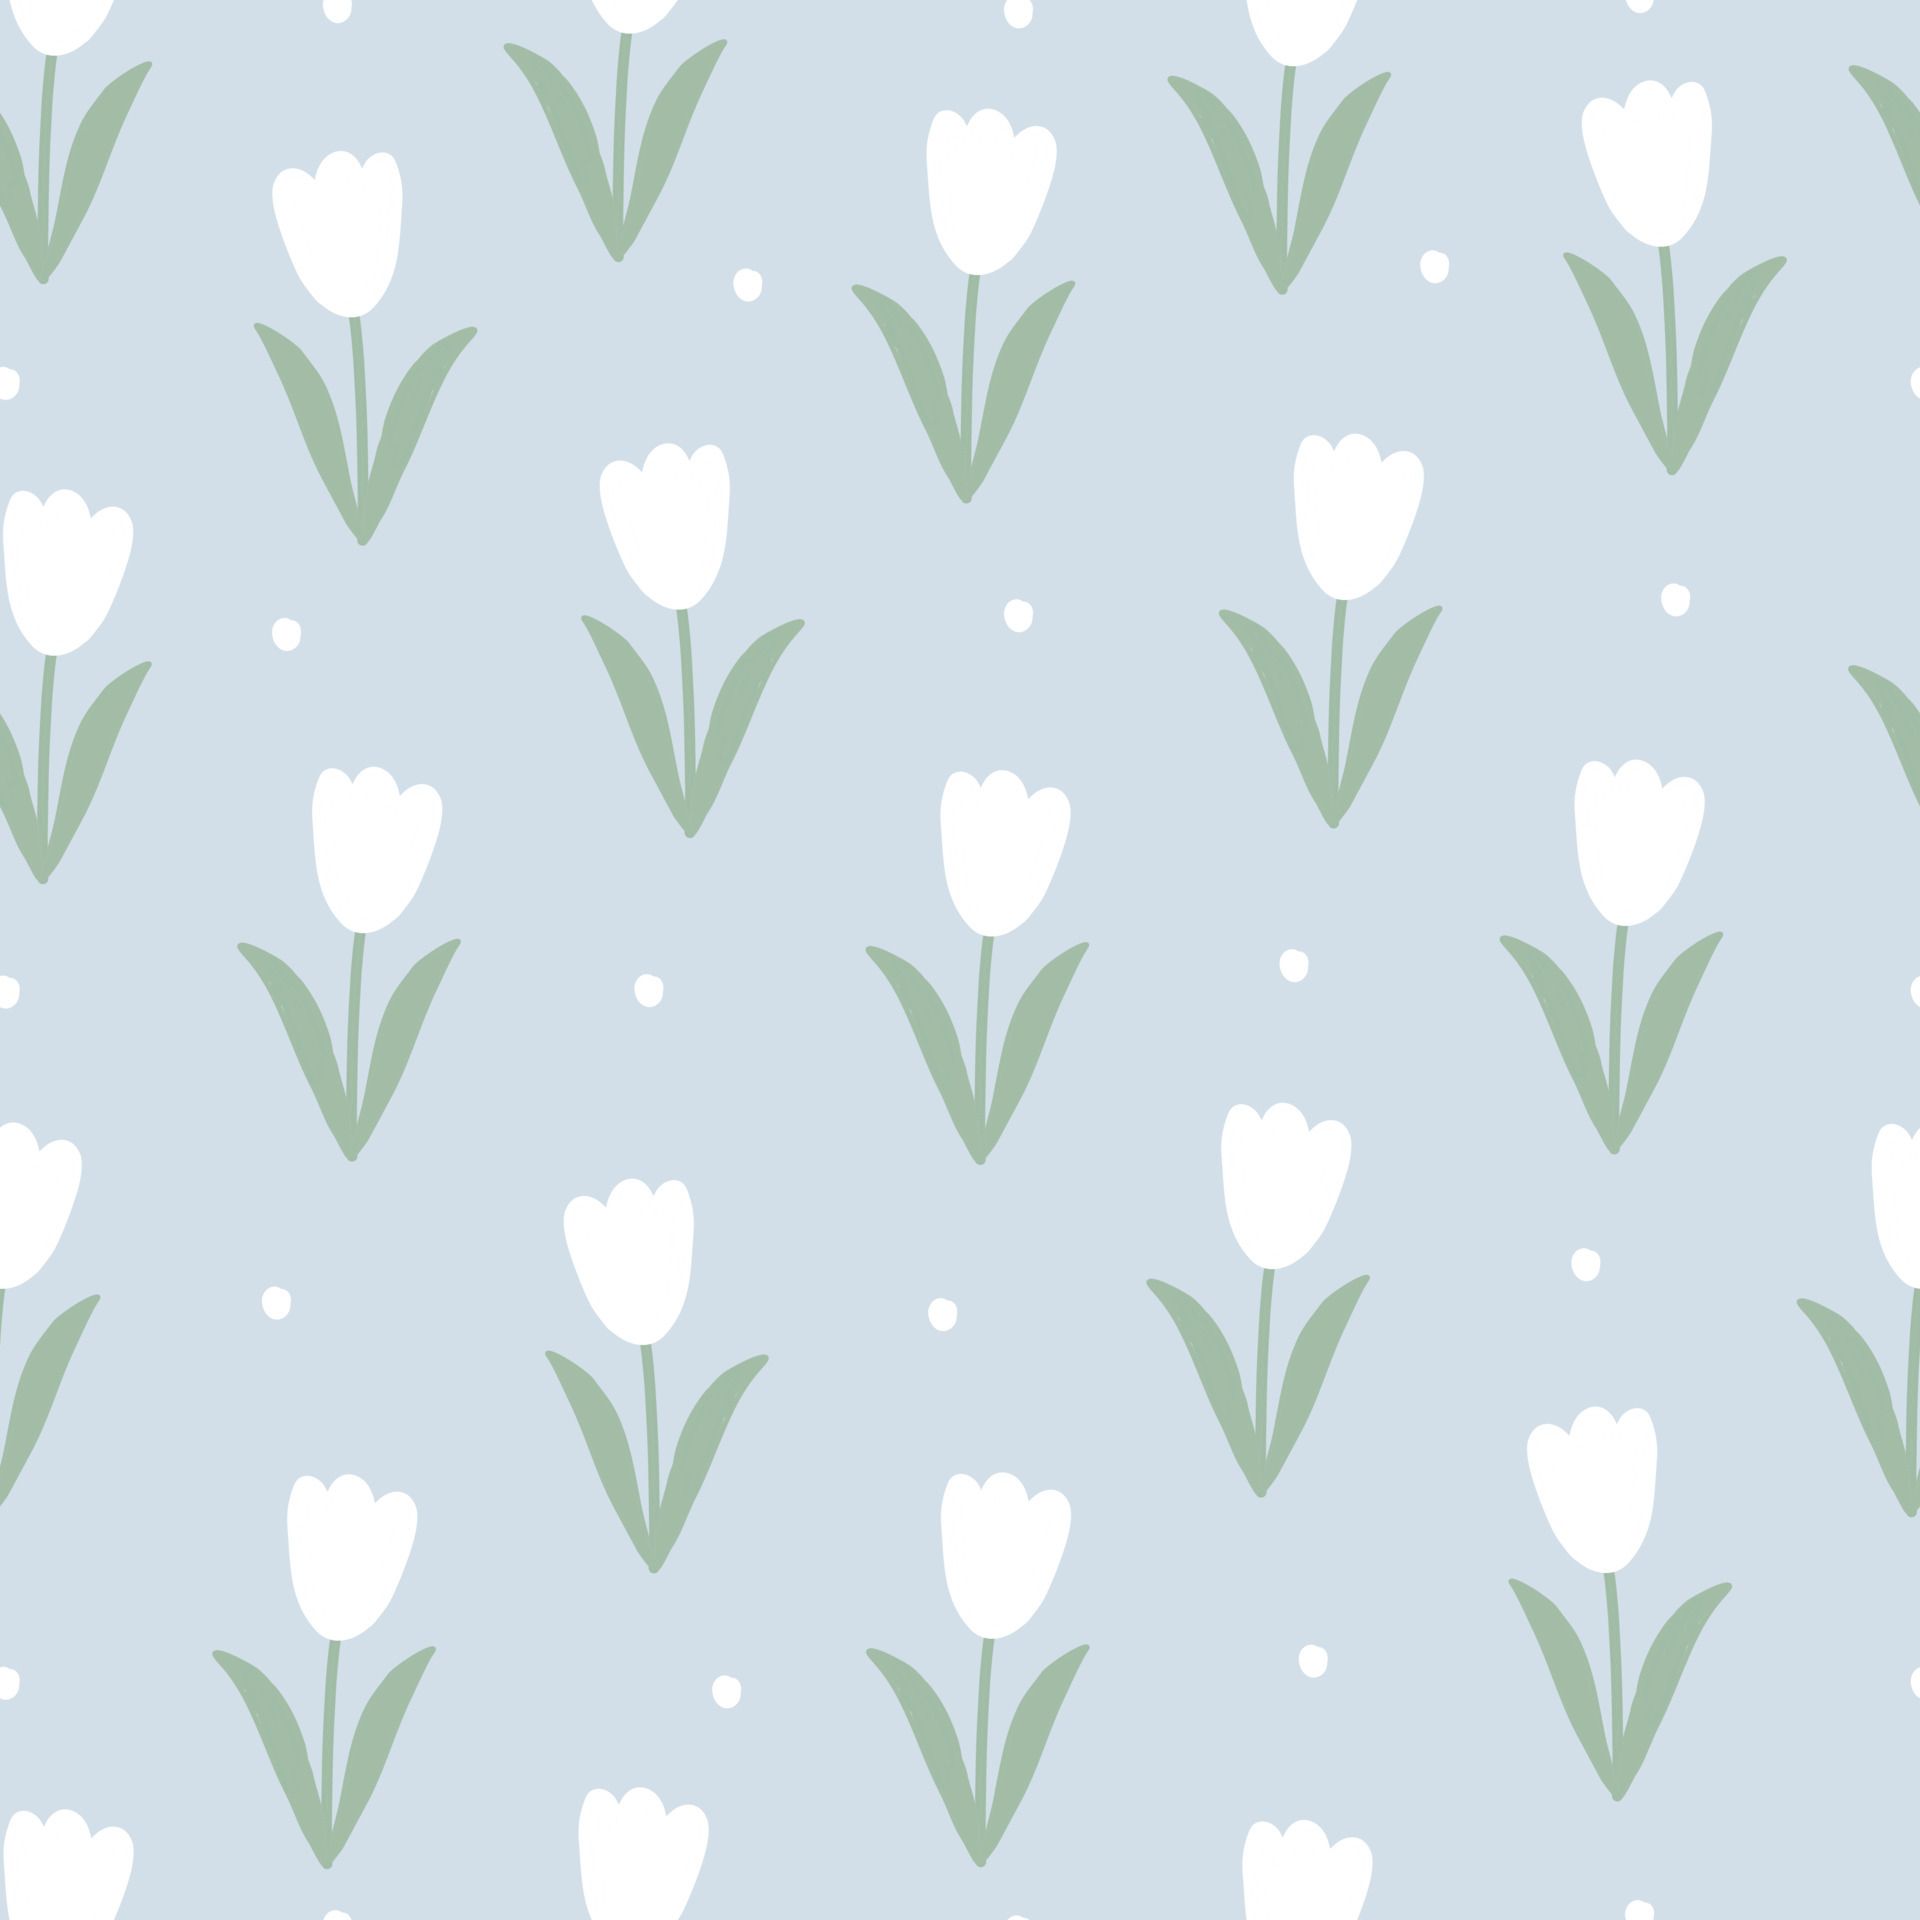 A pattern of white flowers on blue background - Tulip, fashion